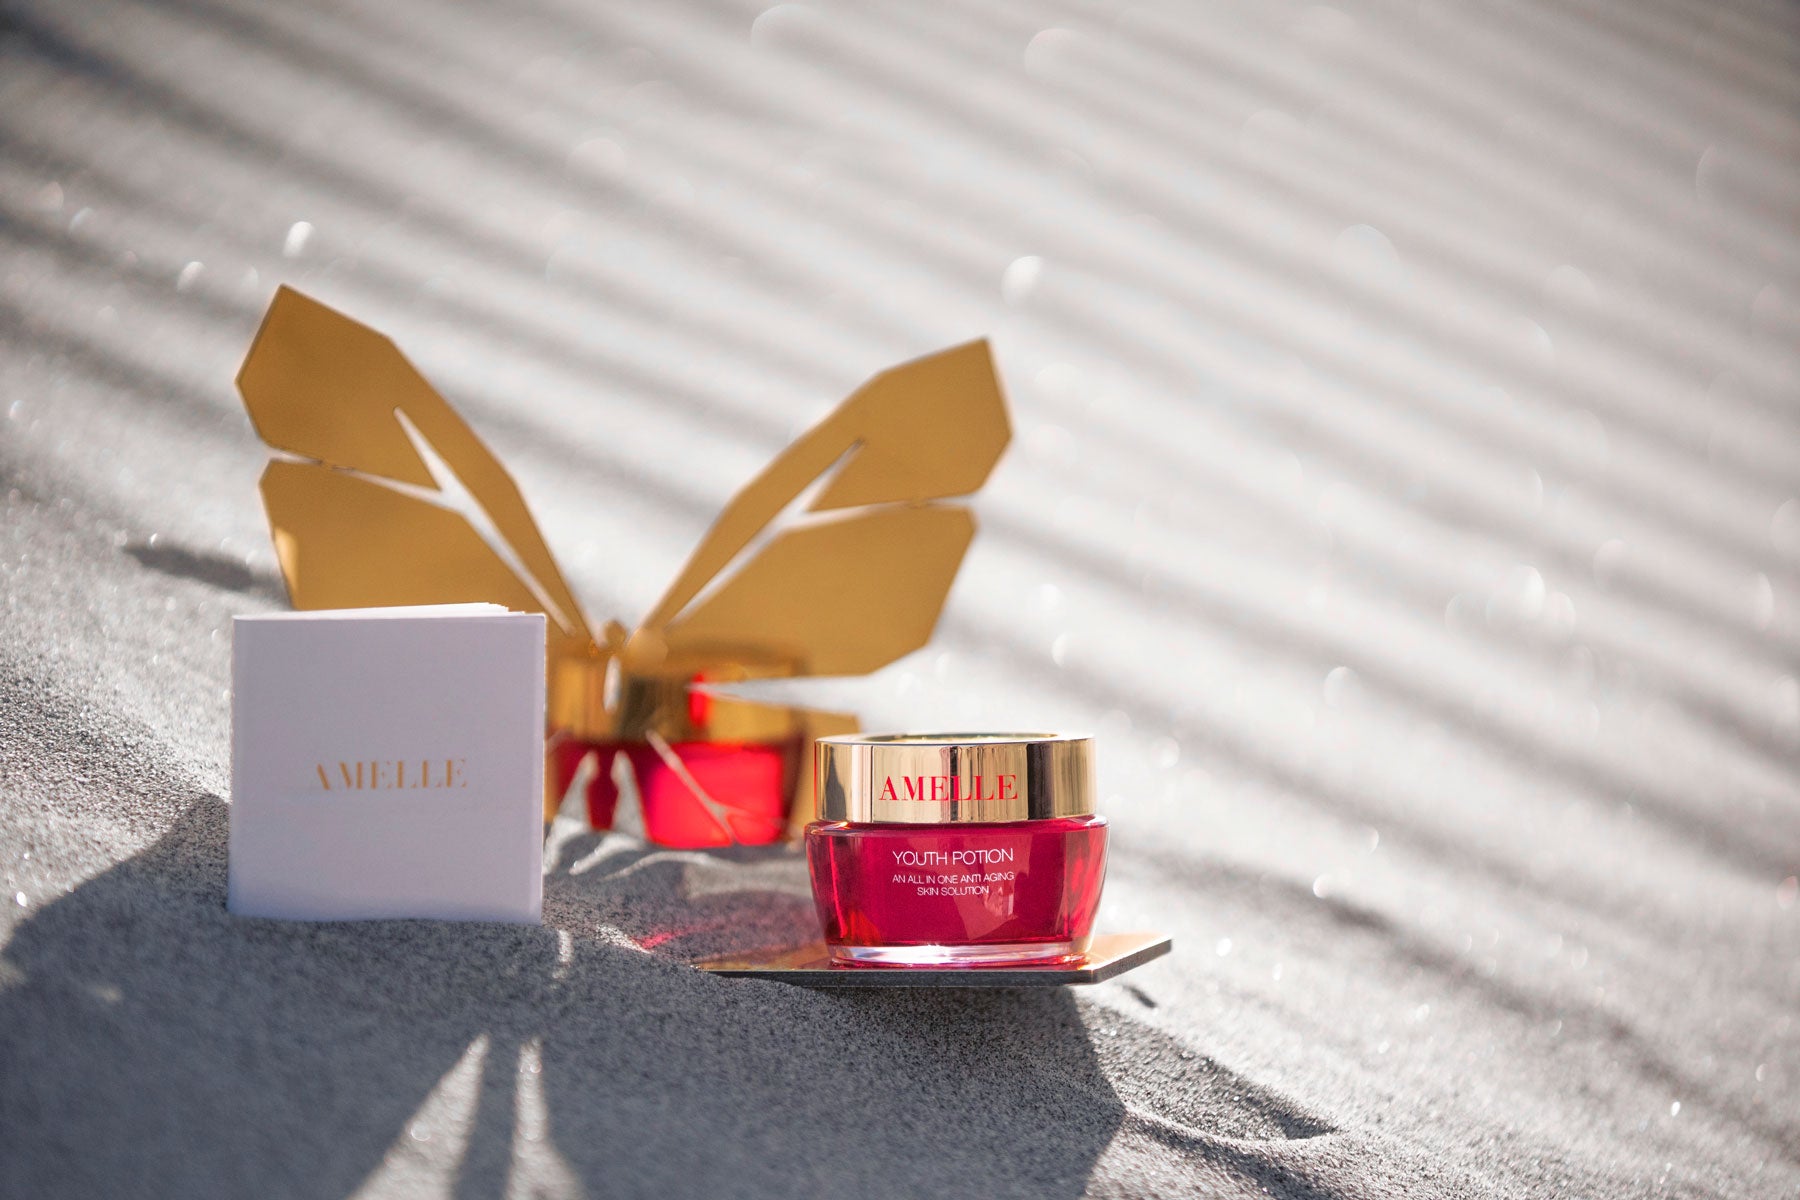 AMELLE Face Cream All in One Anti-Aging Skin Solution Wrinkle Reduction Hyaluronic Acid Retinol